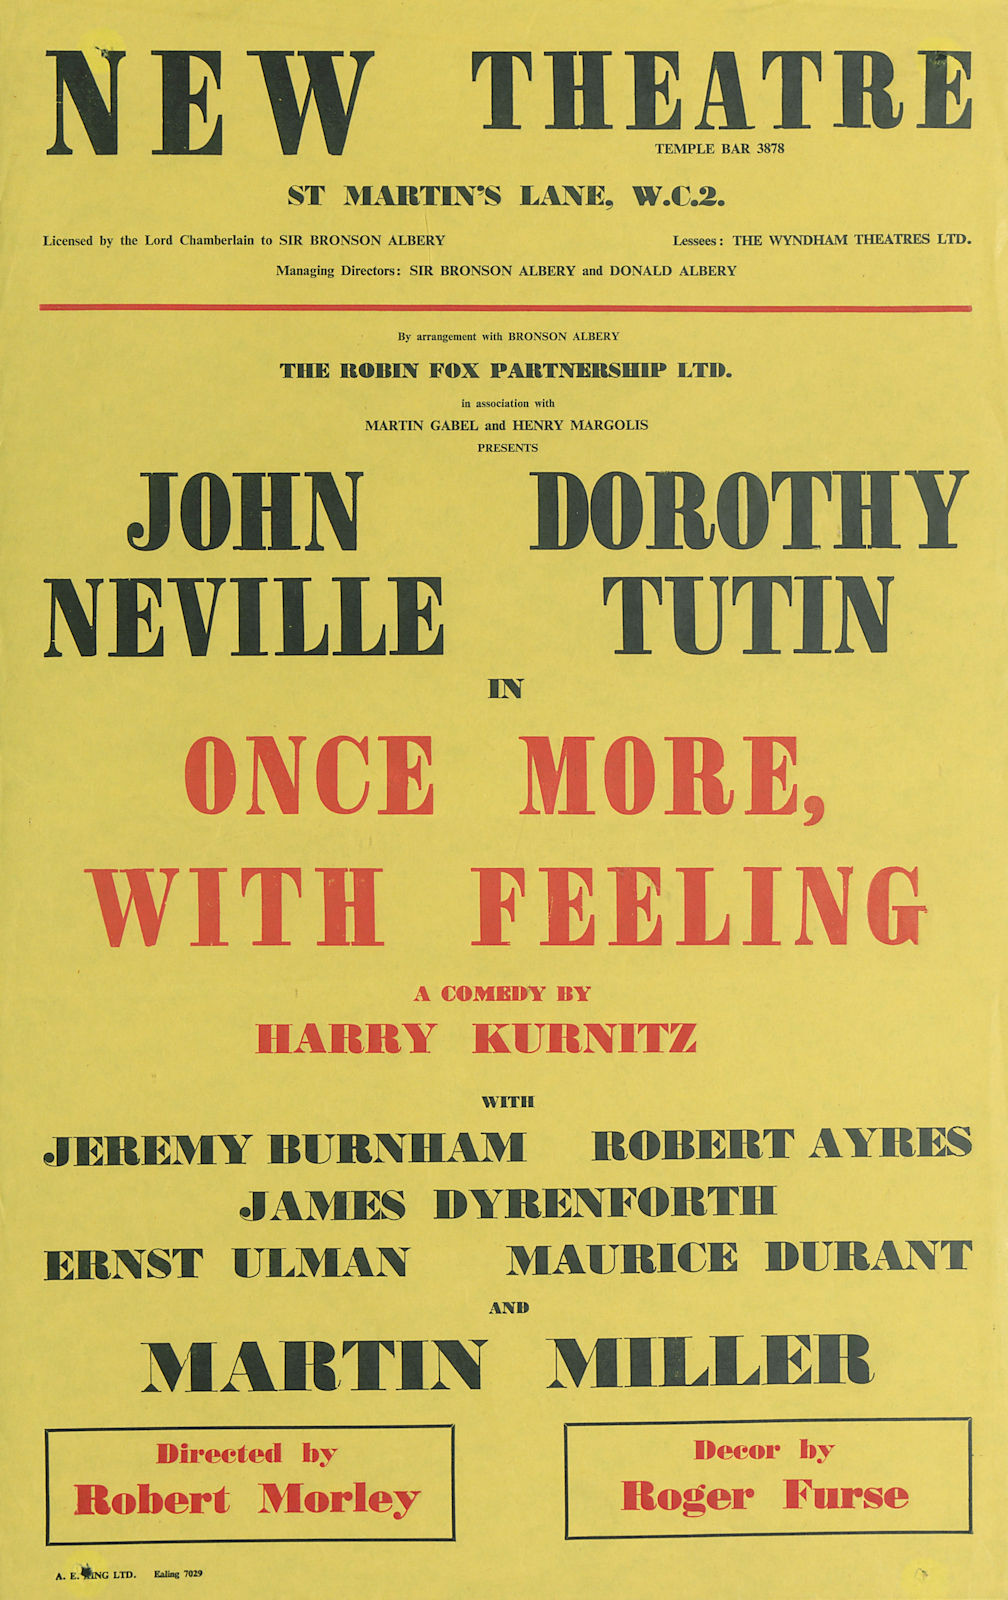 New Theatre. Once More With Feeling. Harry Kurnitz. Neville Tutin Morley 1959